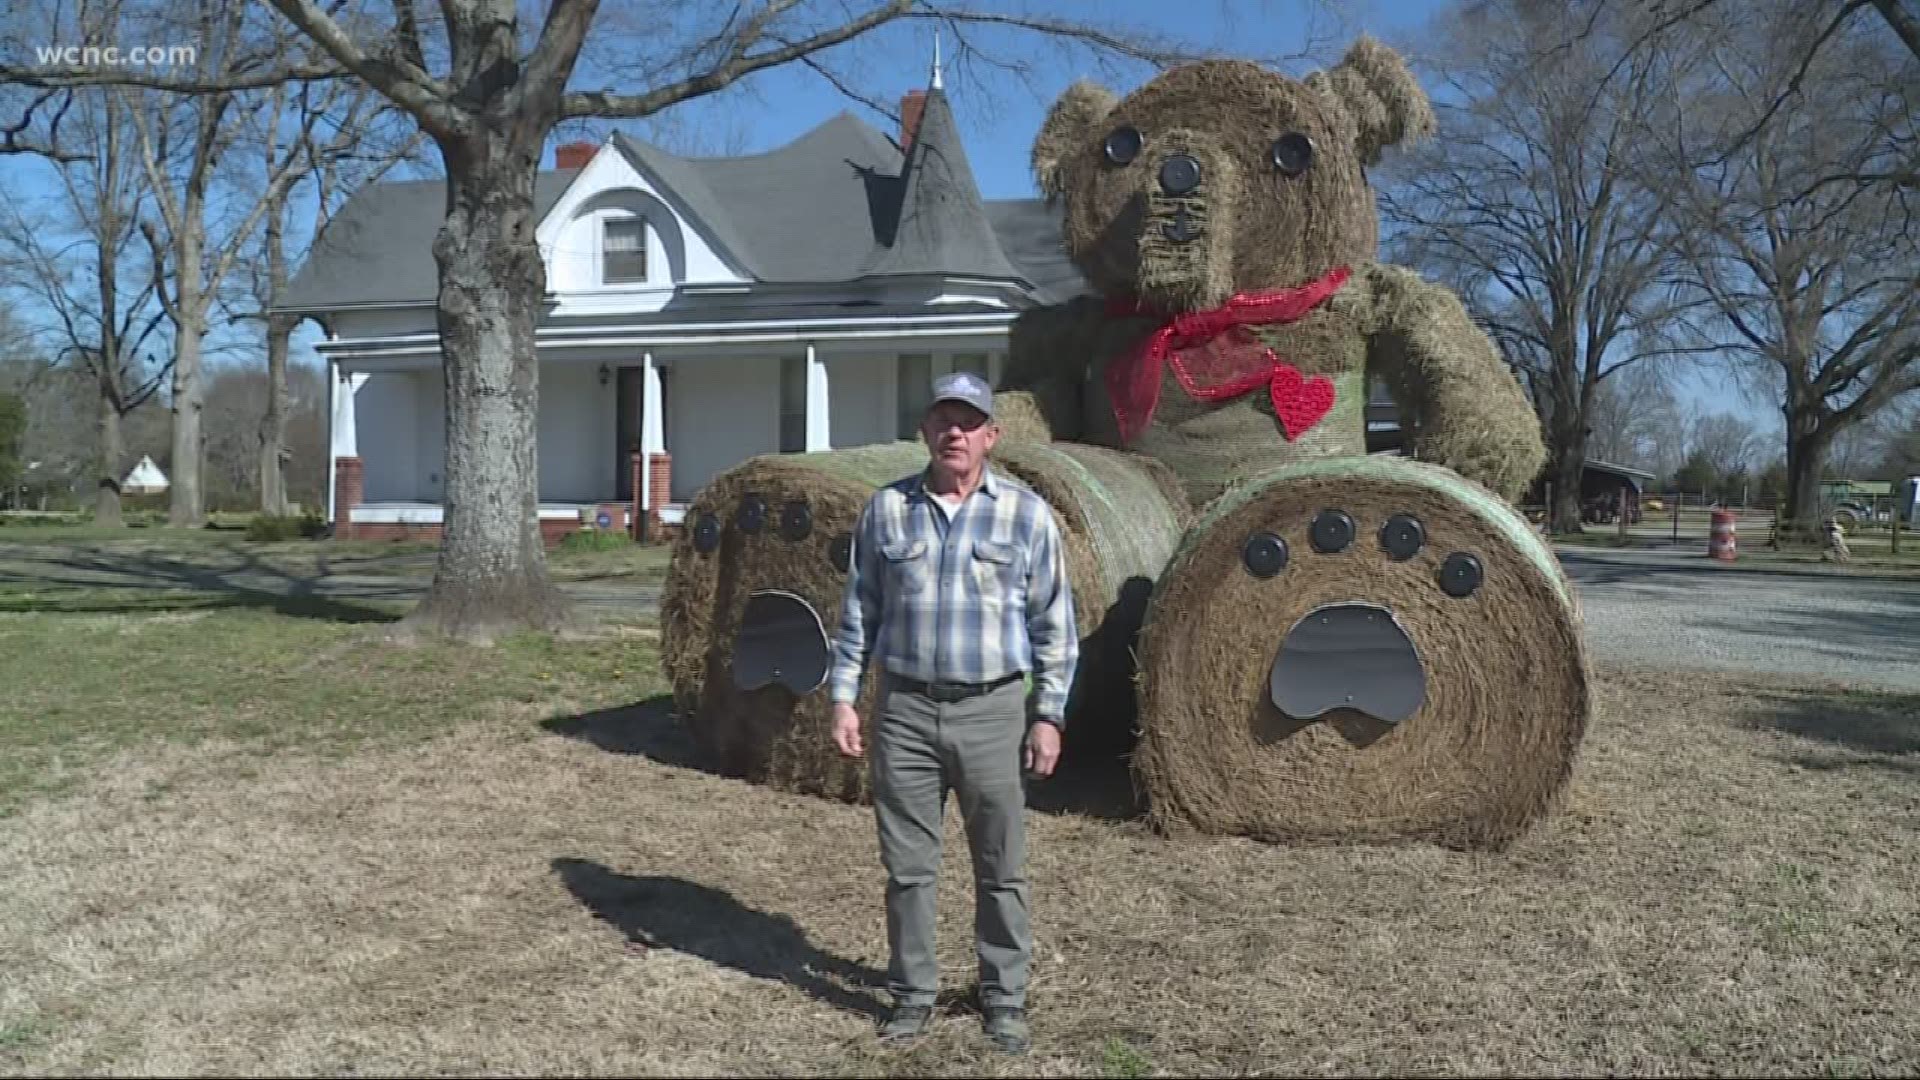 Over the last 40-plus years, Ray Killough earned himself the nickname "Hay Man" by displaying hay art in his front yard.